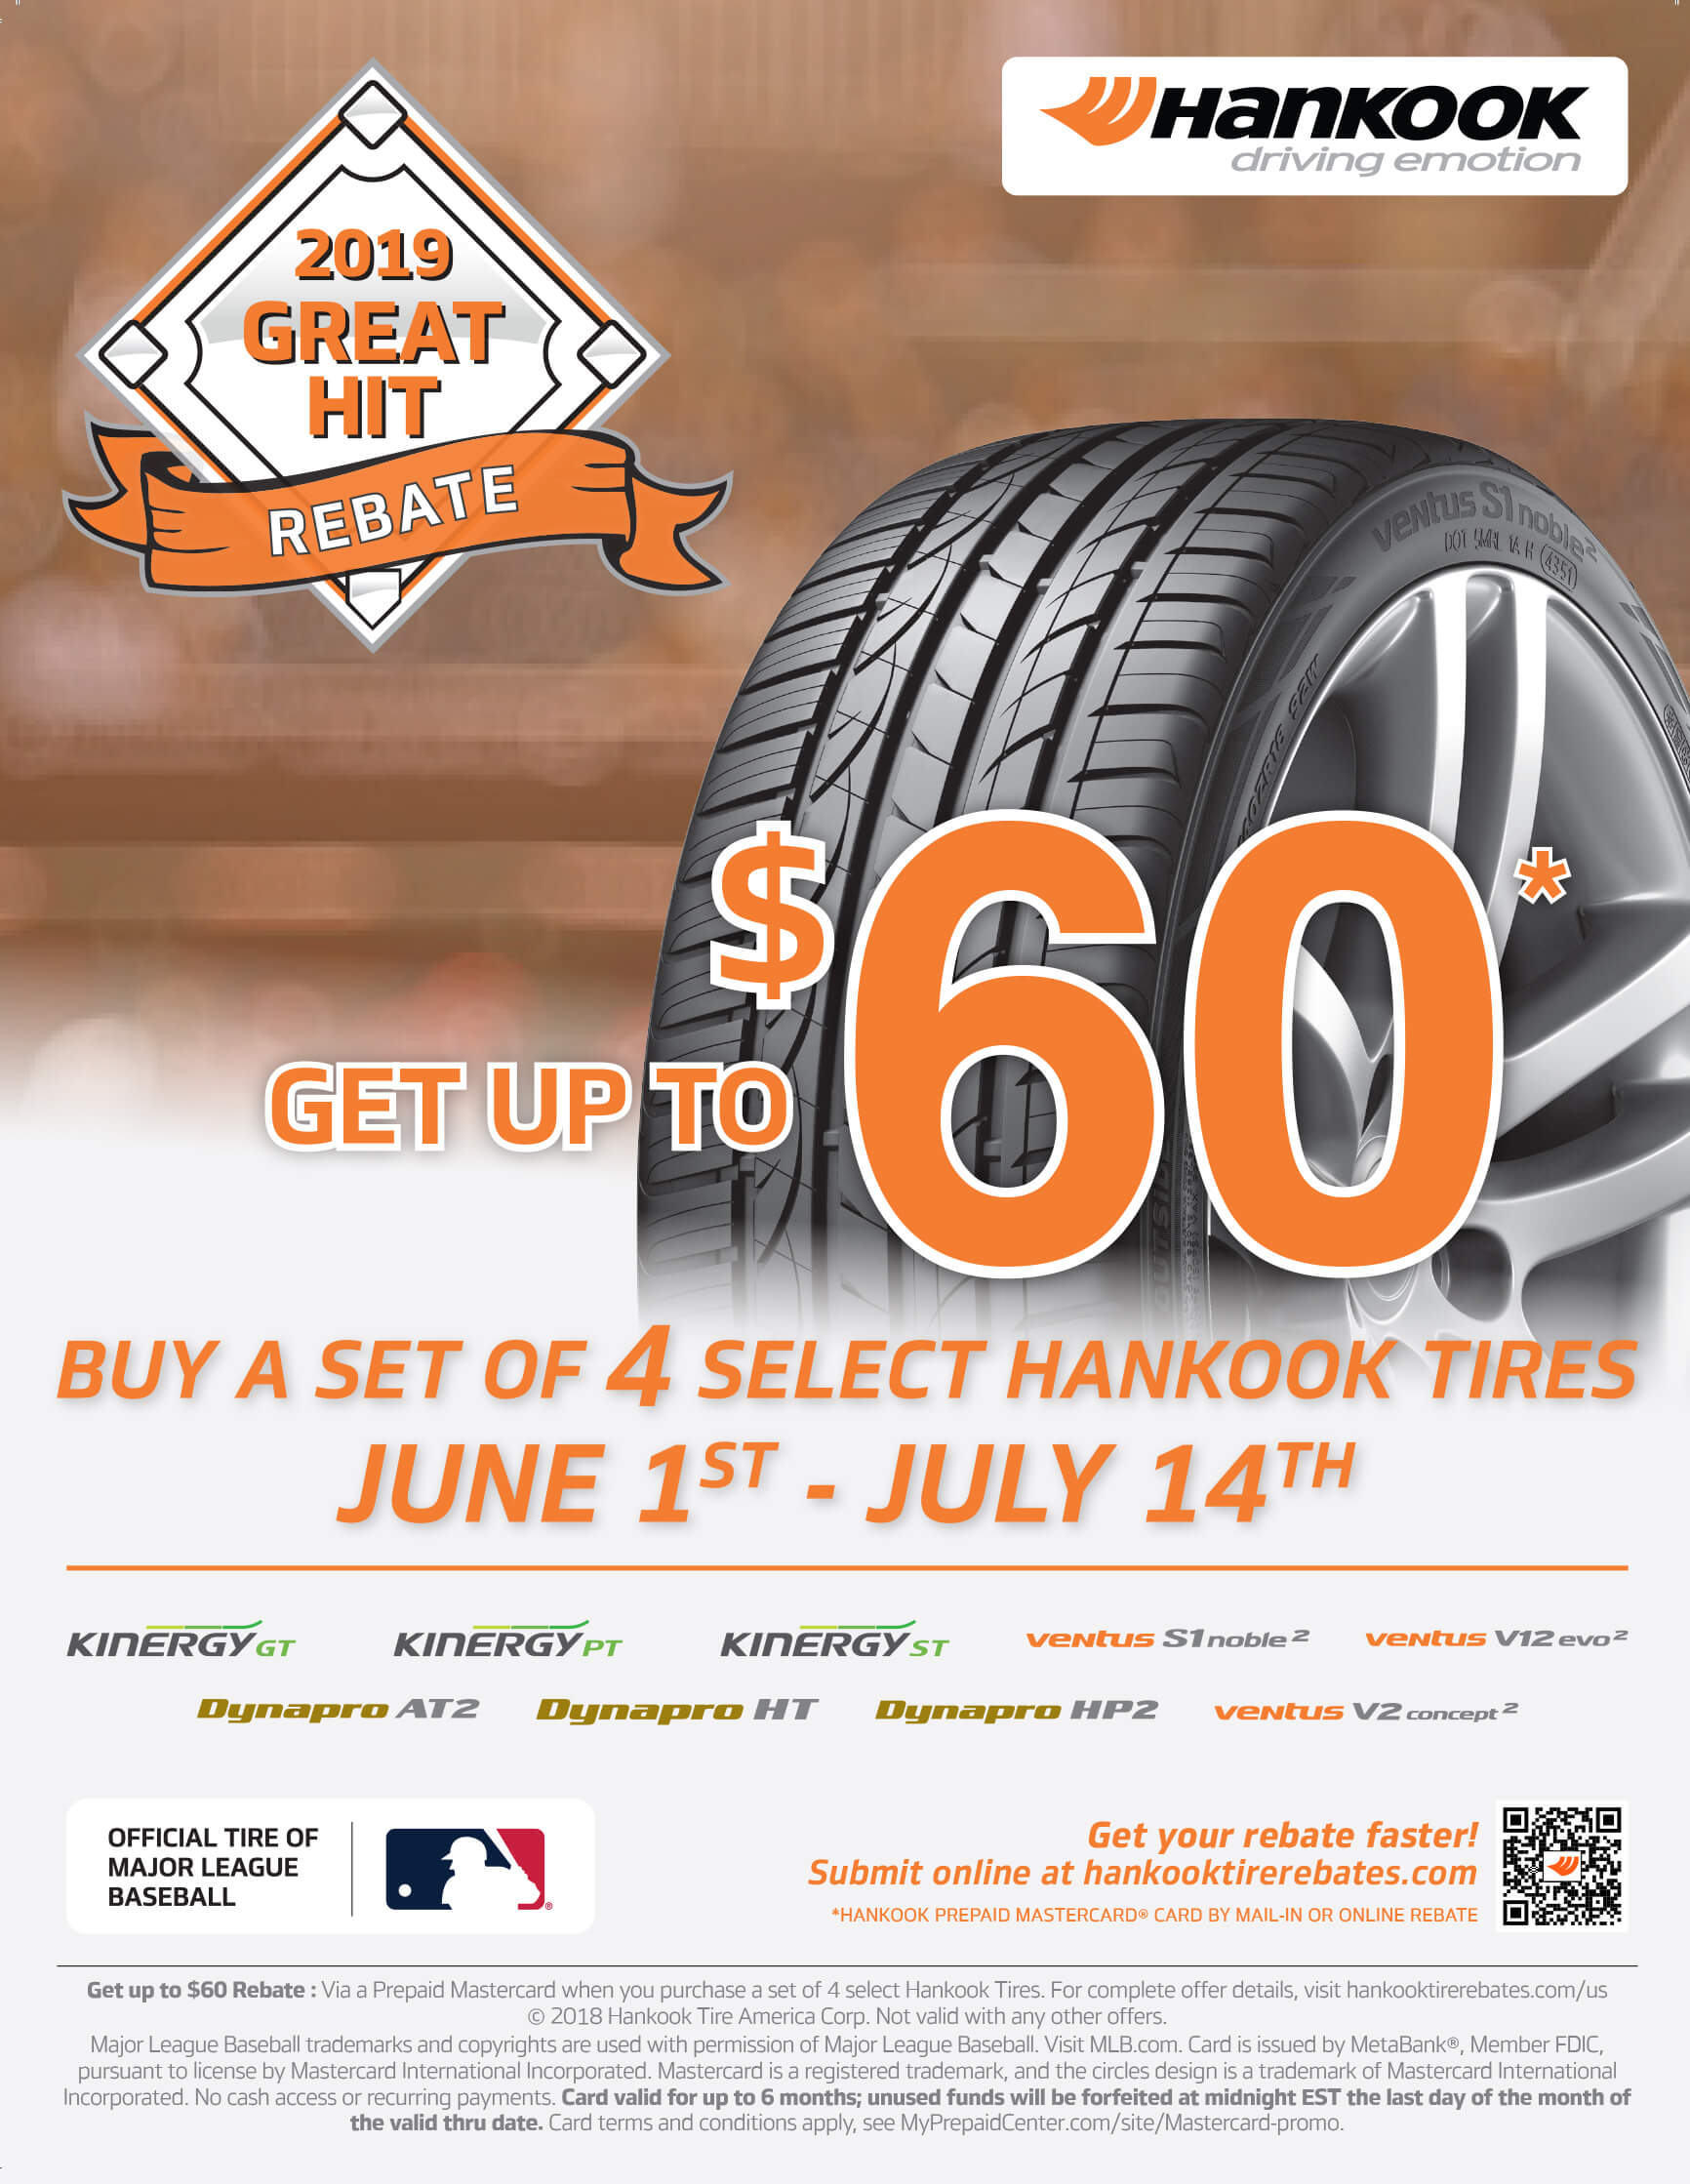 get-up-to-60-when-you-buy-a-set-of-4-select-hankook-tires-kubly-s